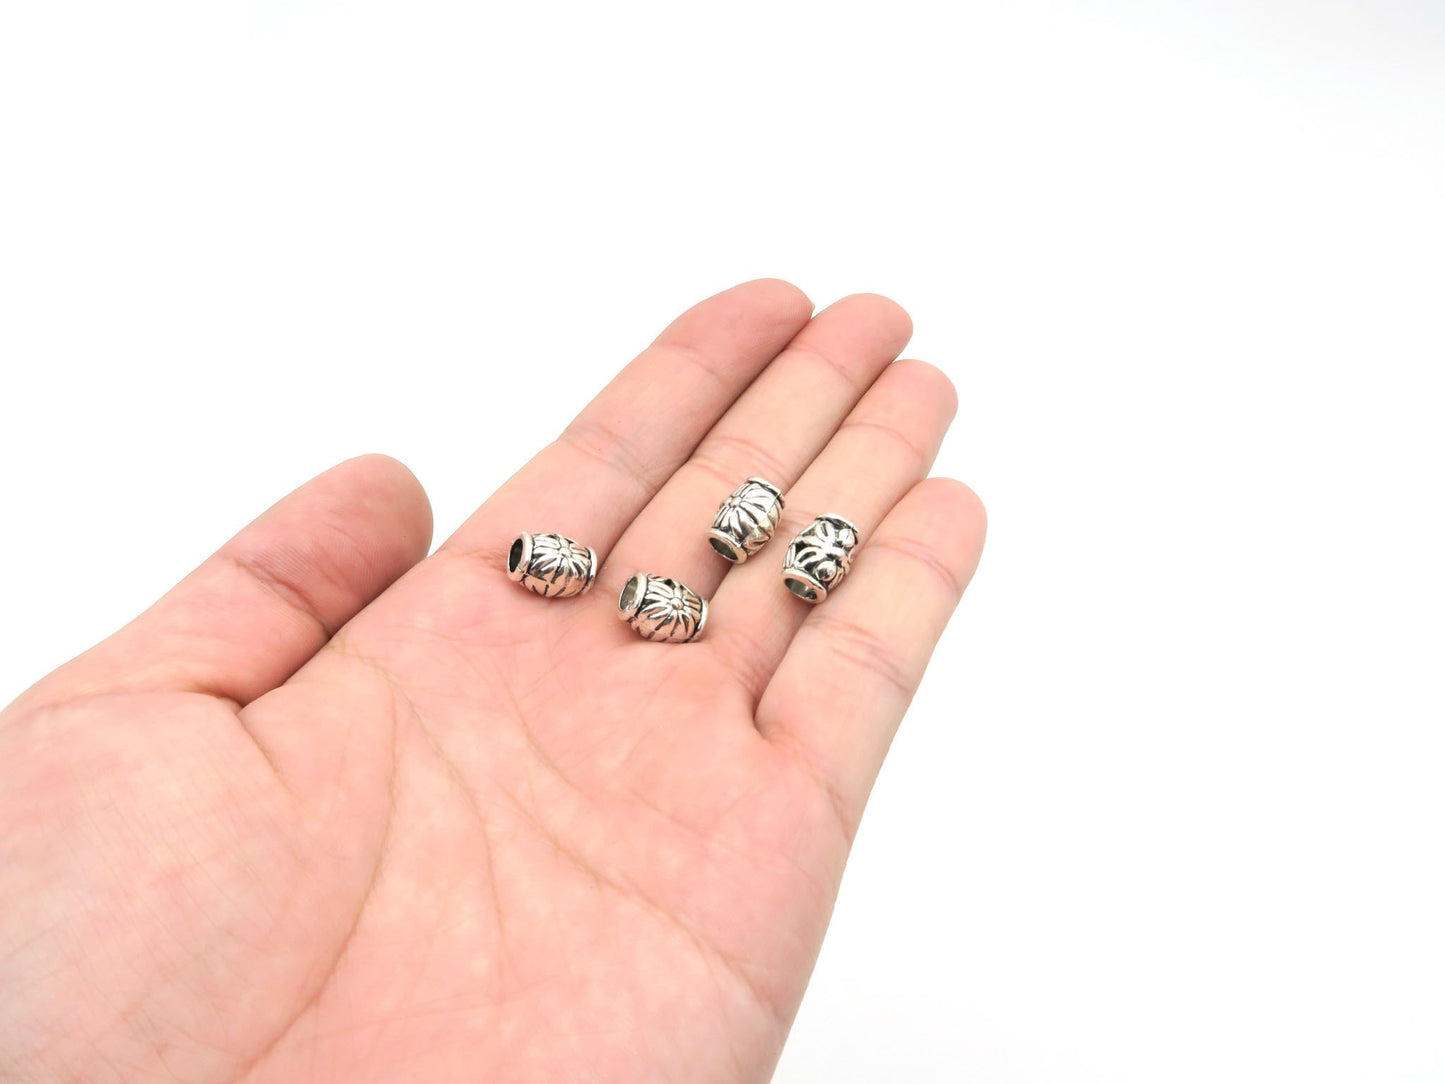 20 Pcs for 5mm round leather Antique Silver Flower bead jewelry supplies jewelry finding D-5-5-5